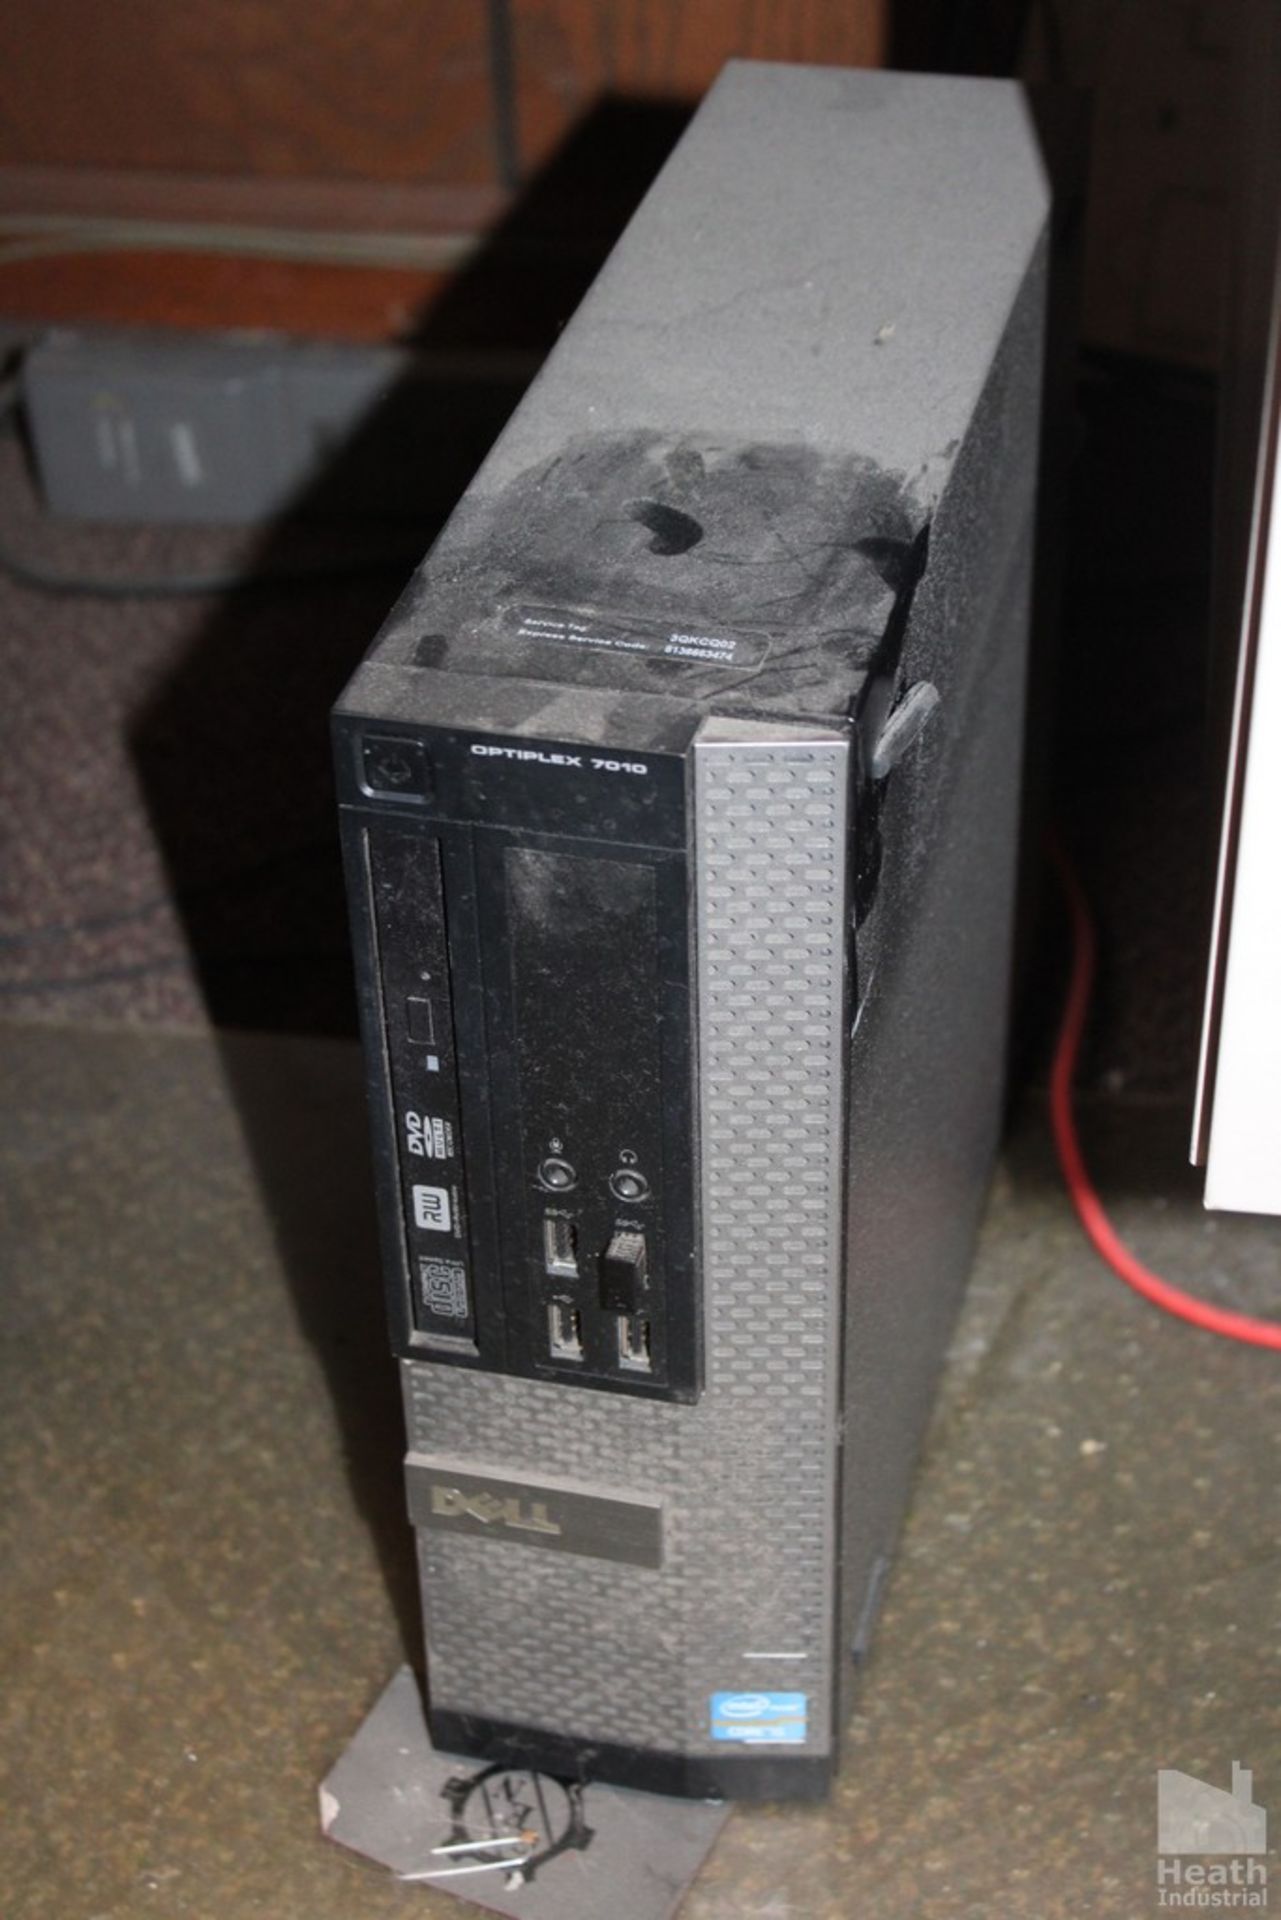 DELL OPTIPLEX 7010 WITH FLATSCREEN MONITOR, SPEAKERS AND MOUSE - Image 2 of 2